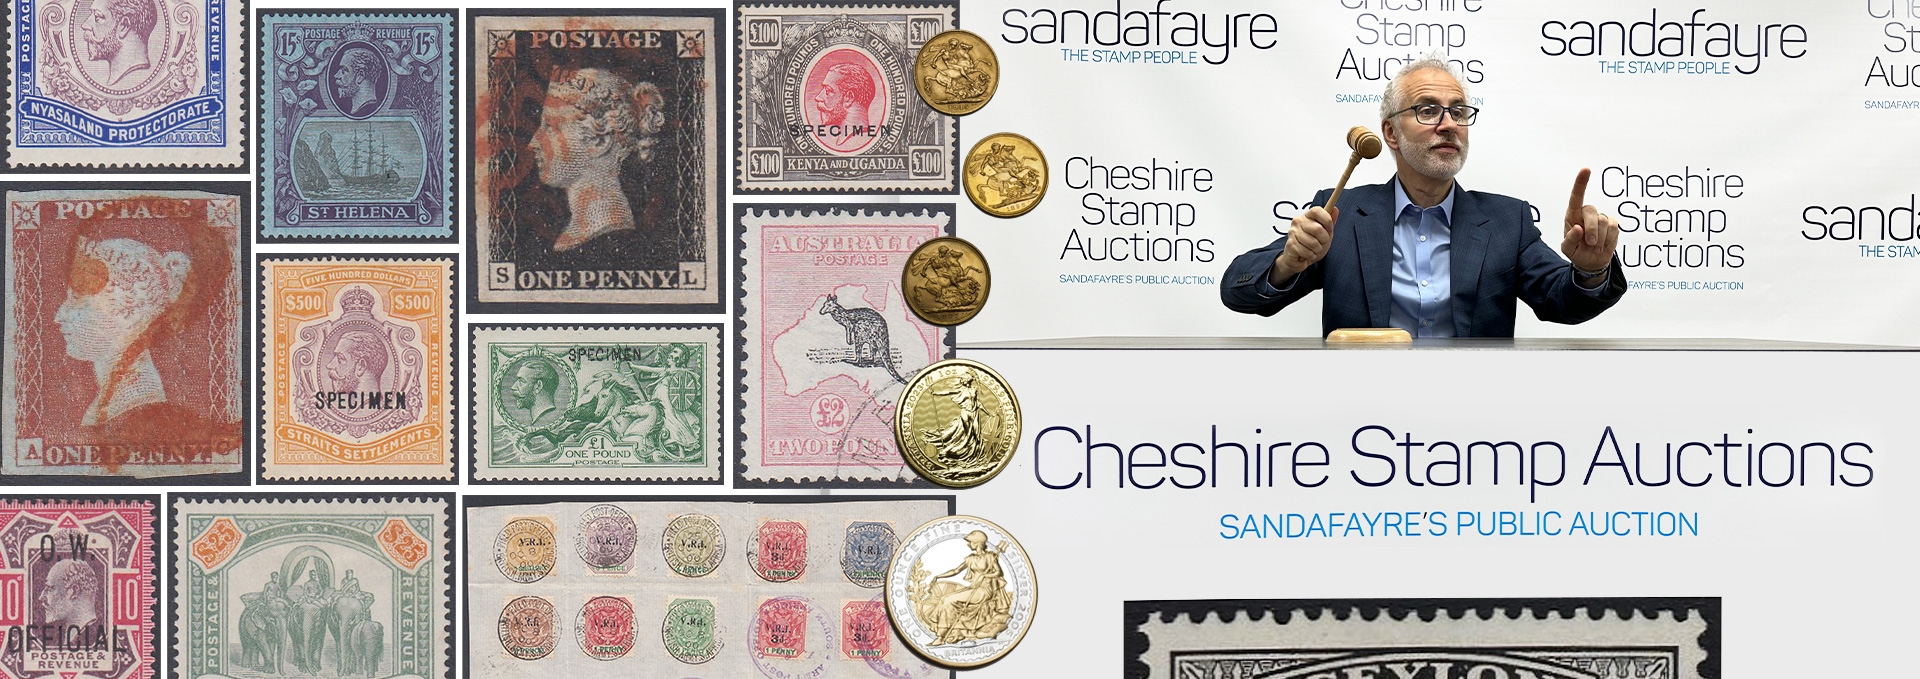 Stamp Auctions | Coins | Cheshire Stamp Auctions carousel